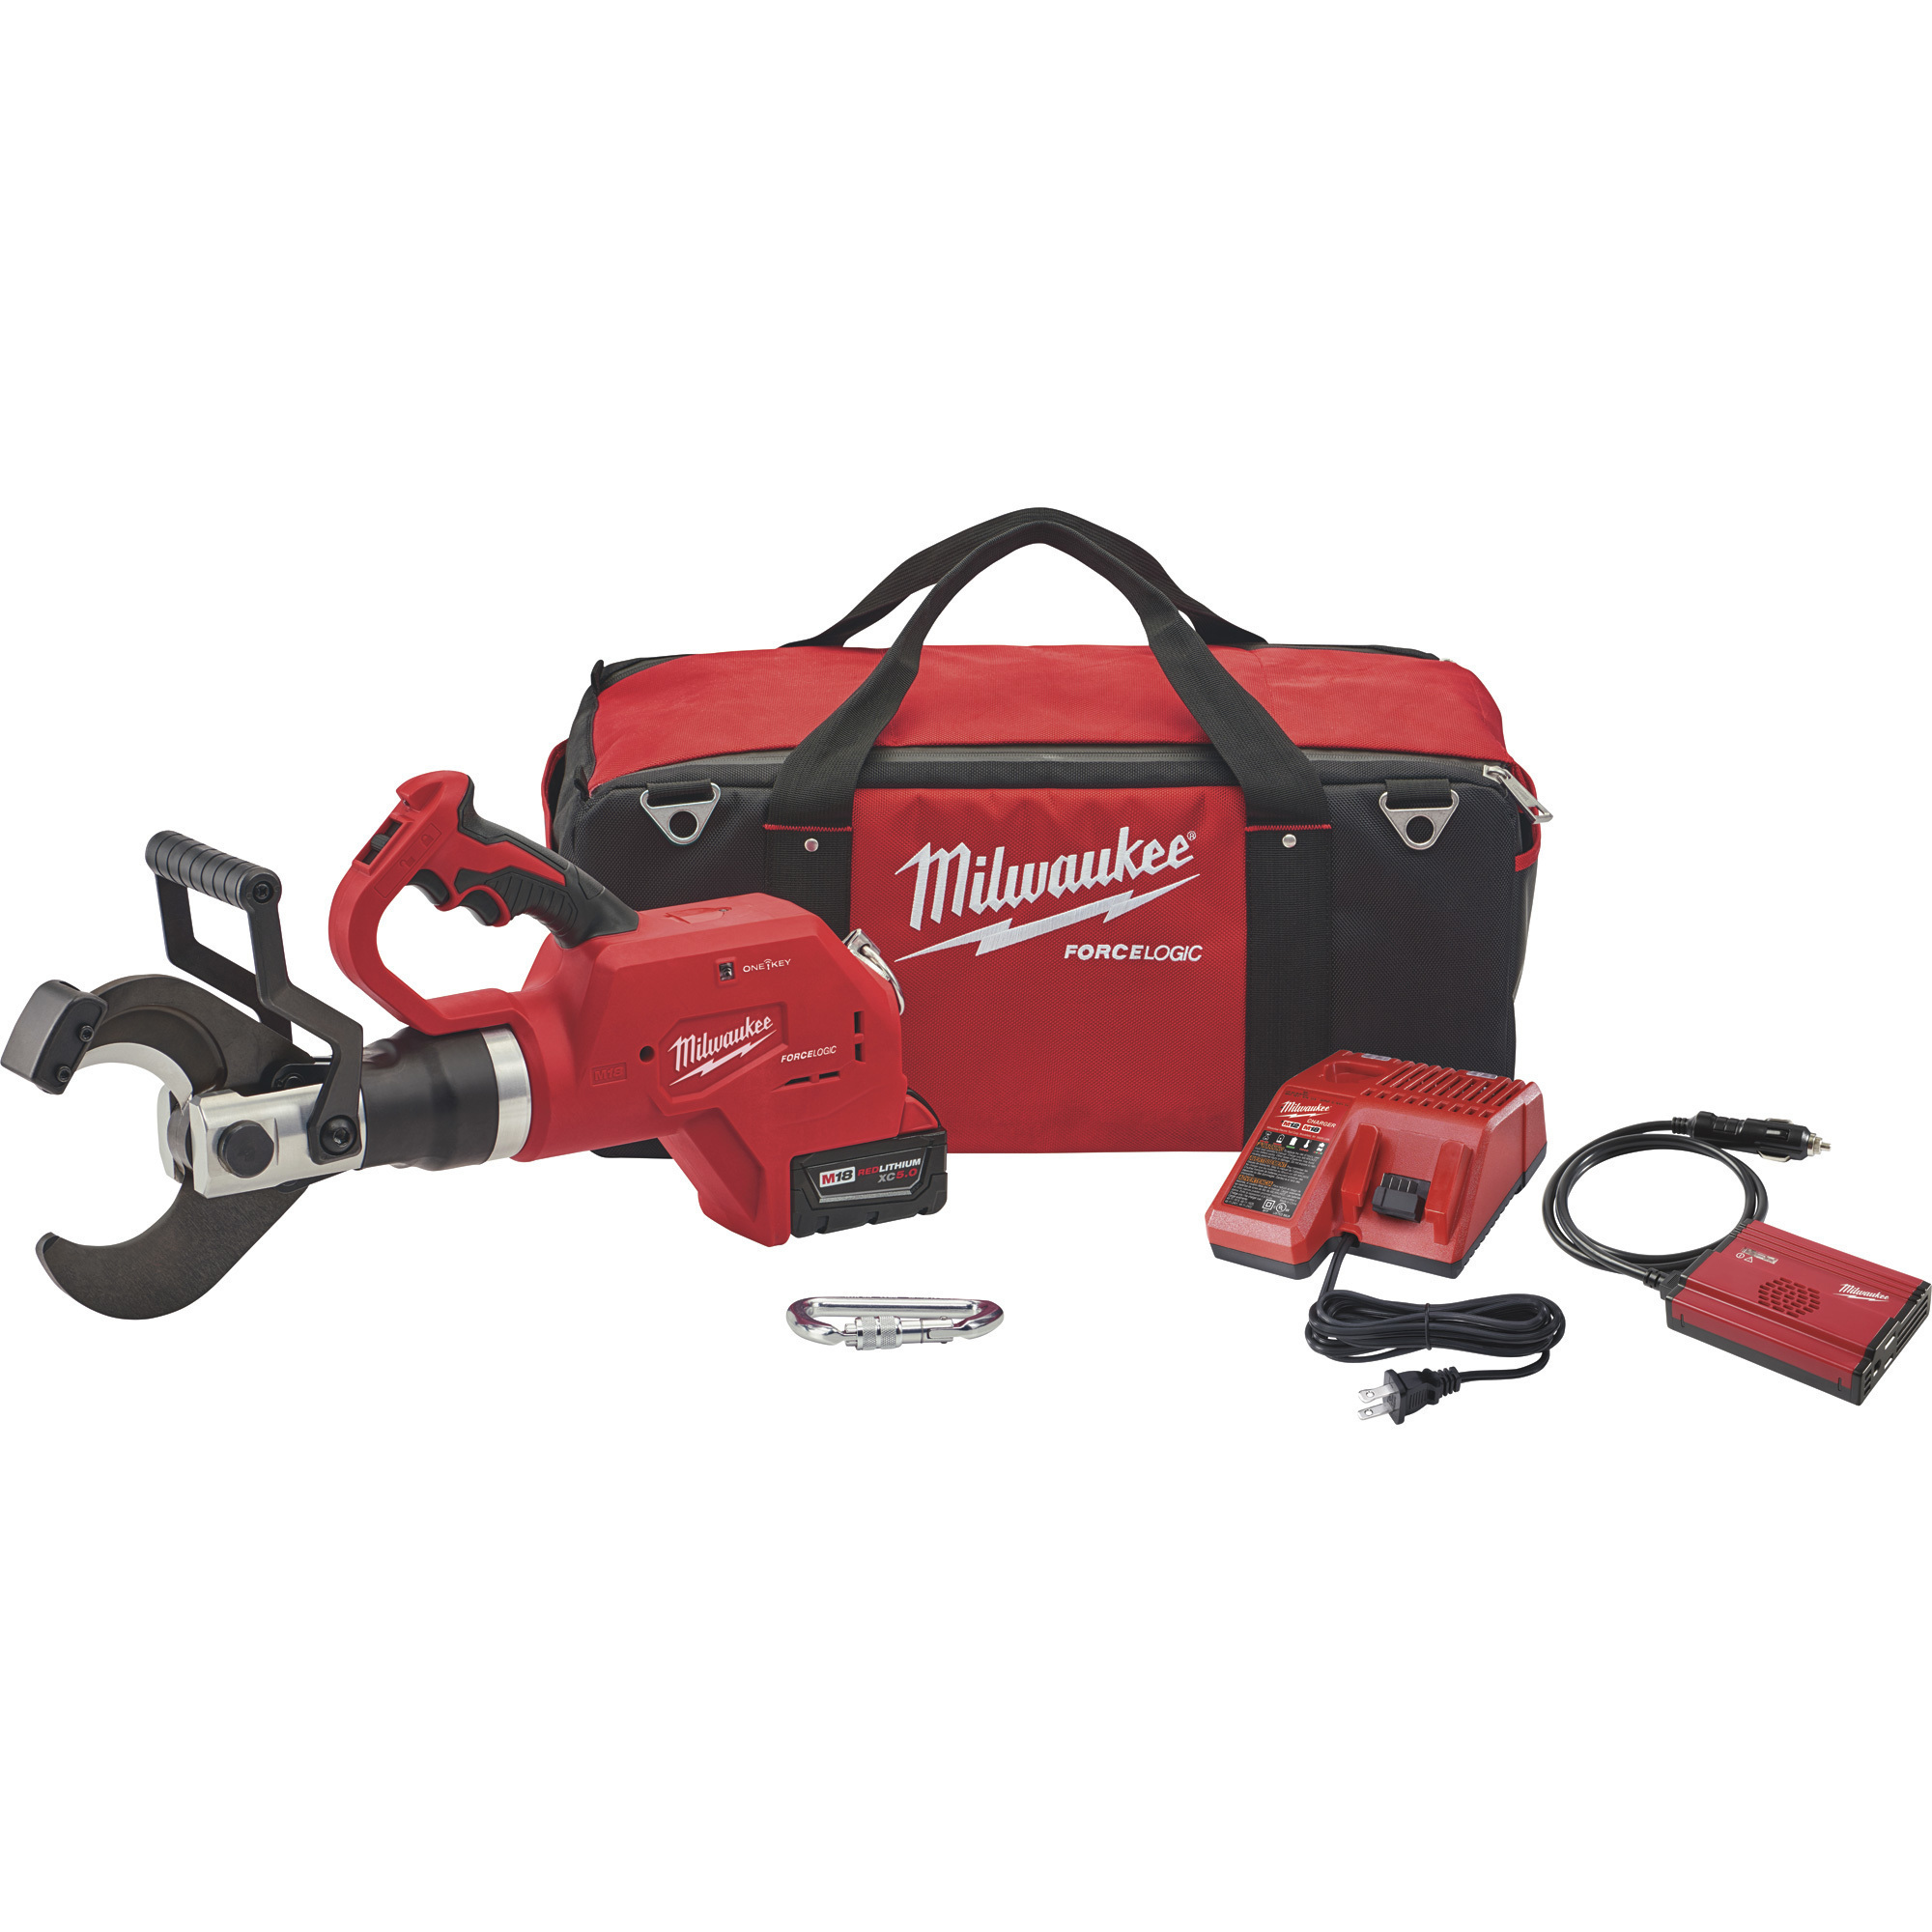 Milwaukee M18 Force Logic 3Inch Underground Cable Cutter, With One Battery, Model 2776-21